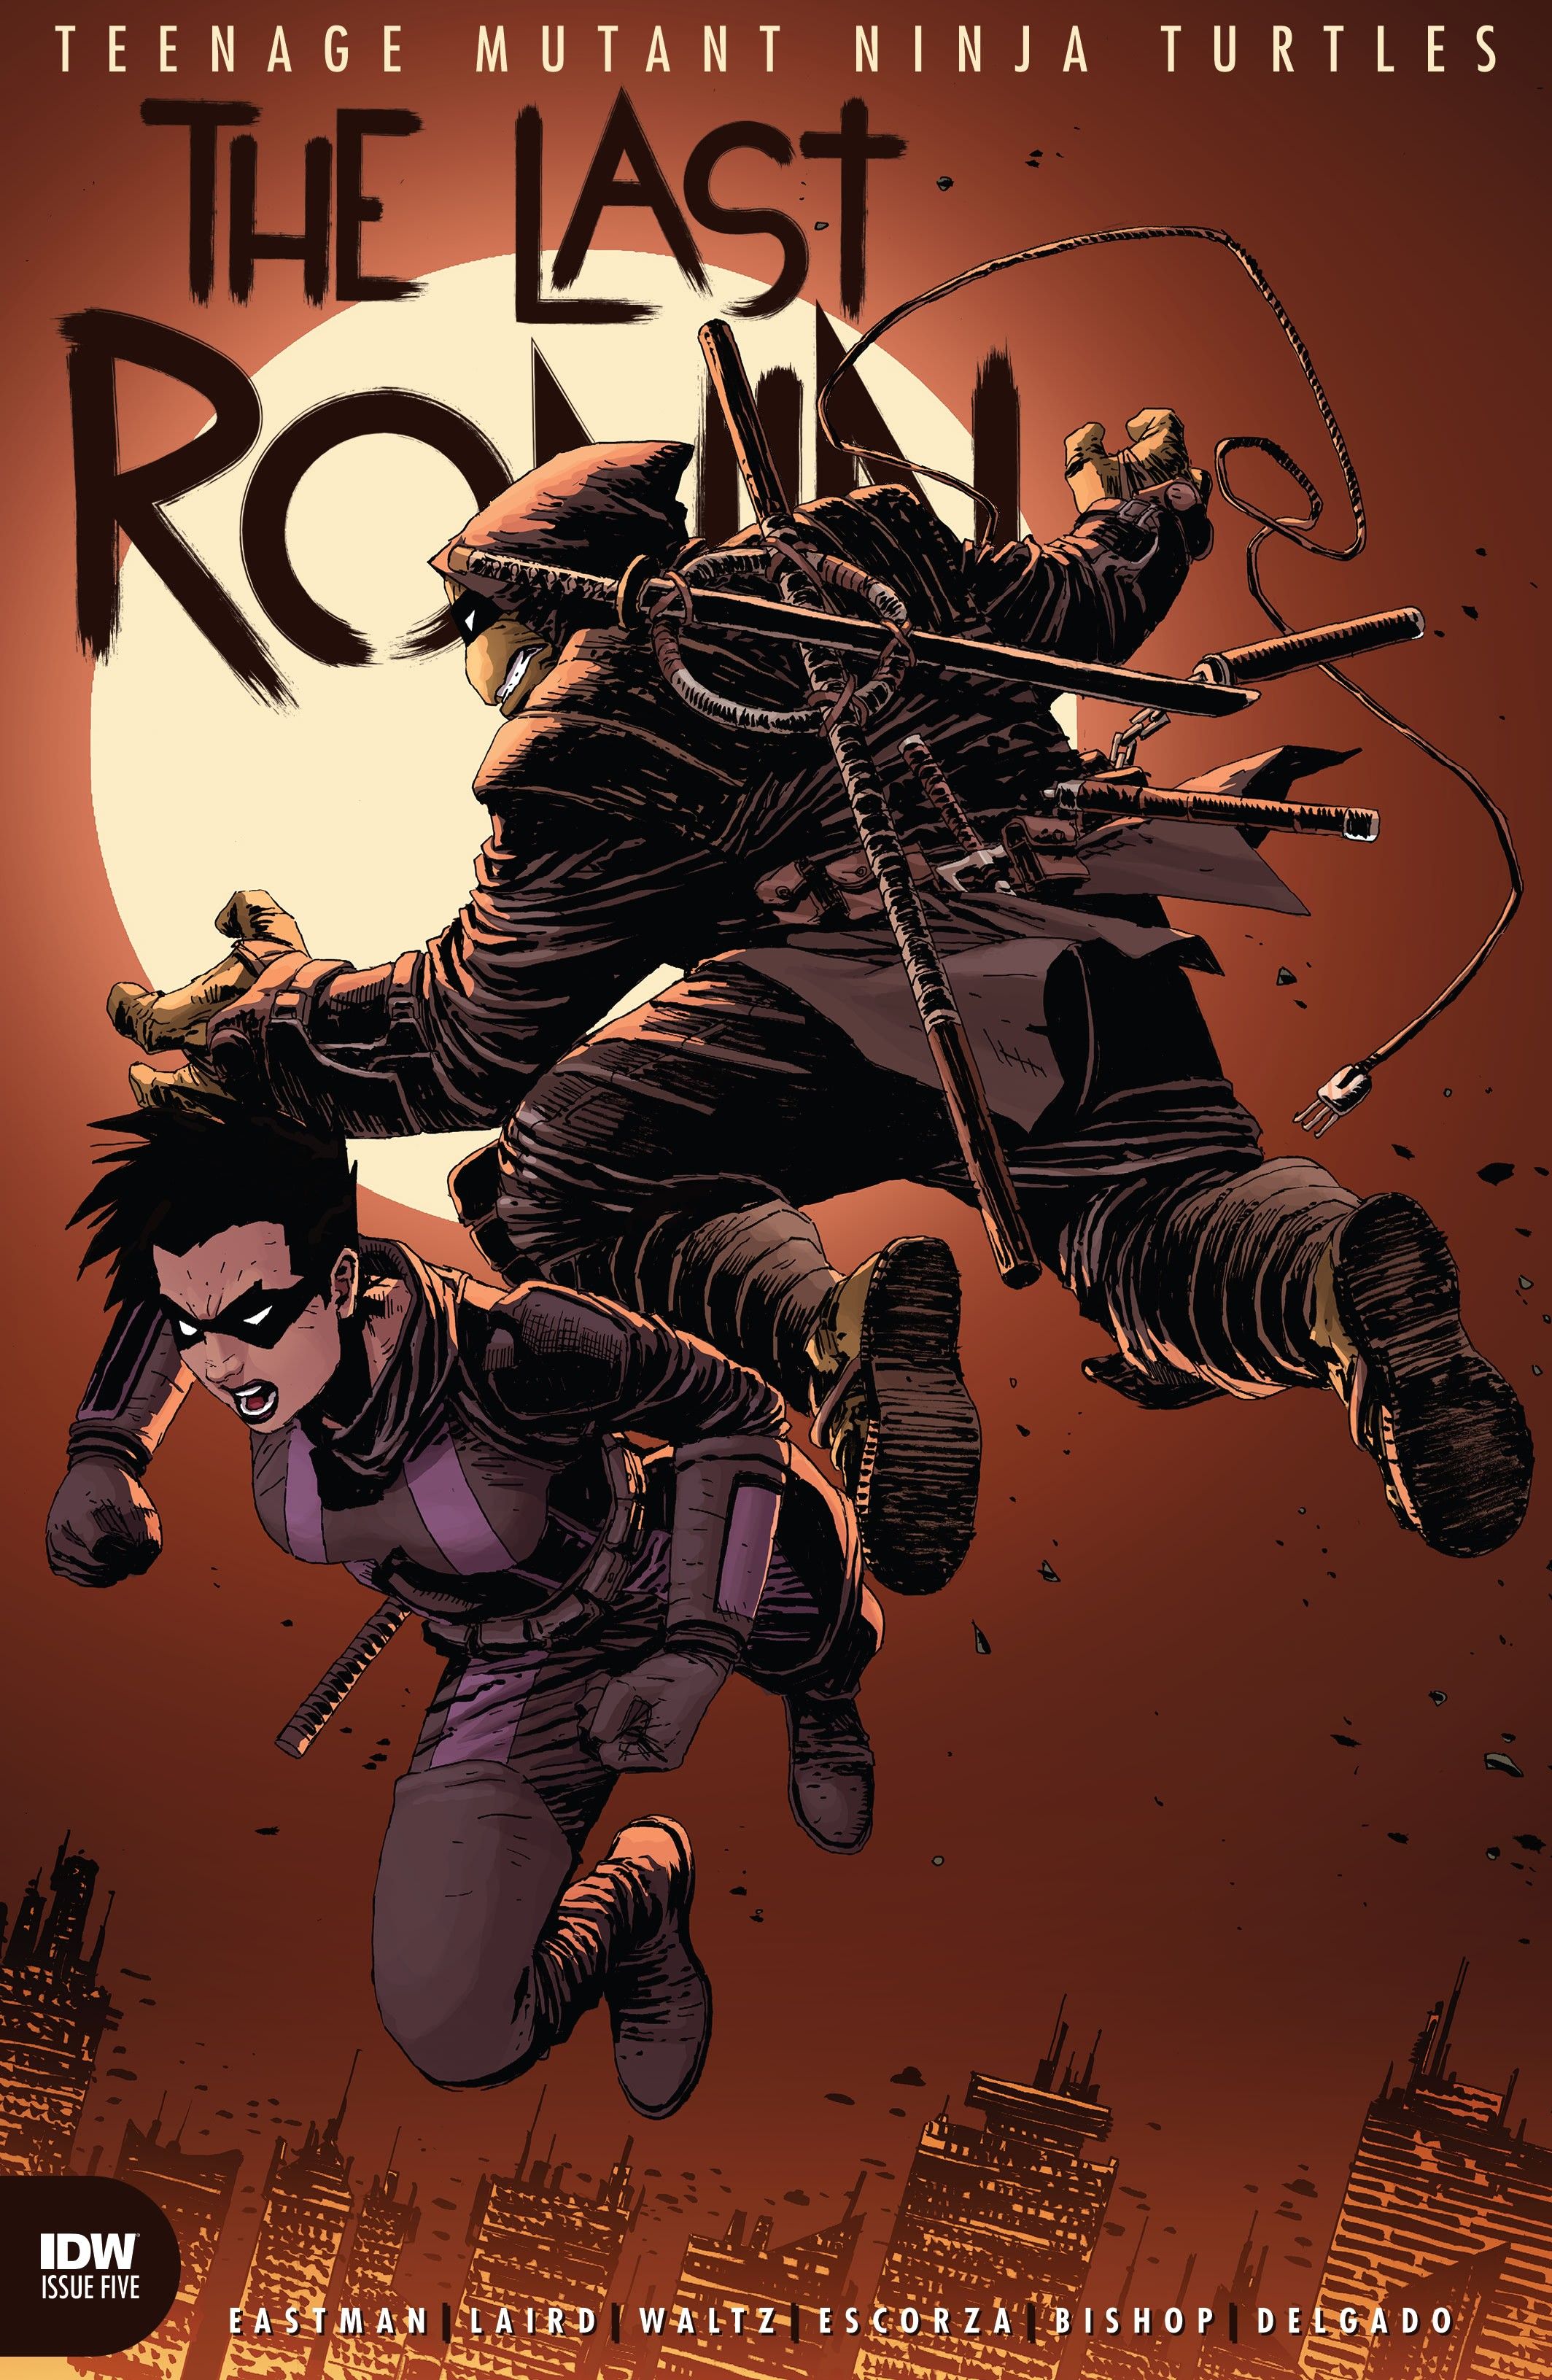 Cover of TMNT: The Last Ronin #5 